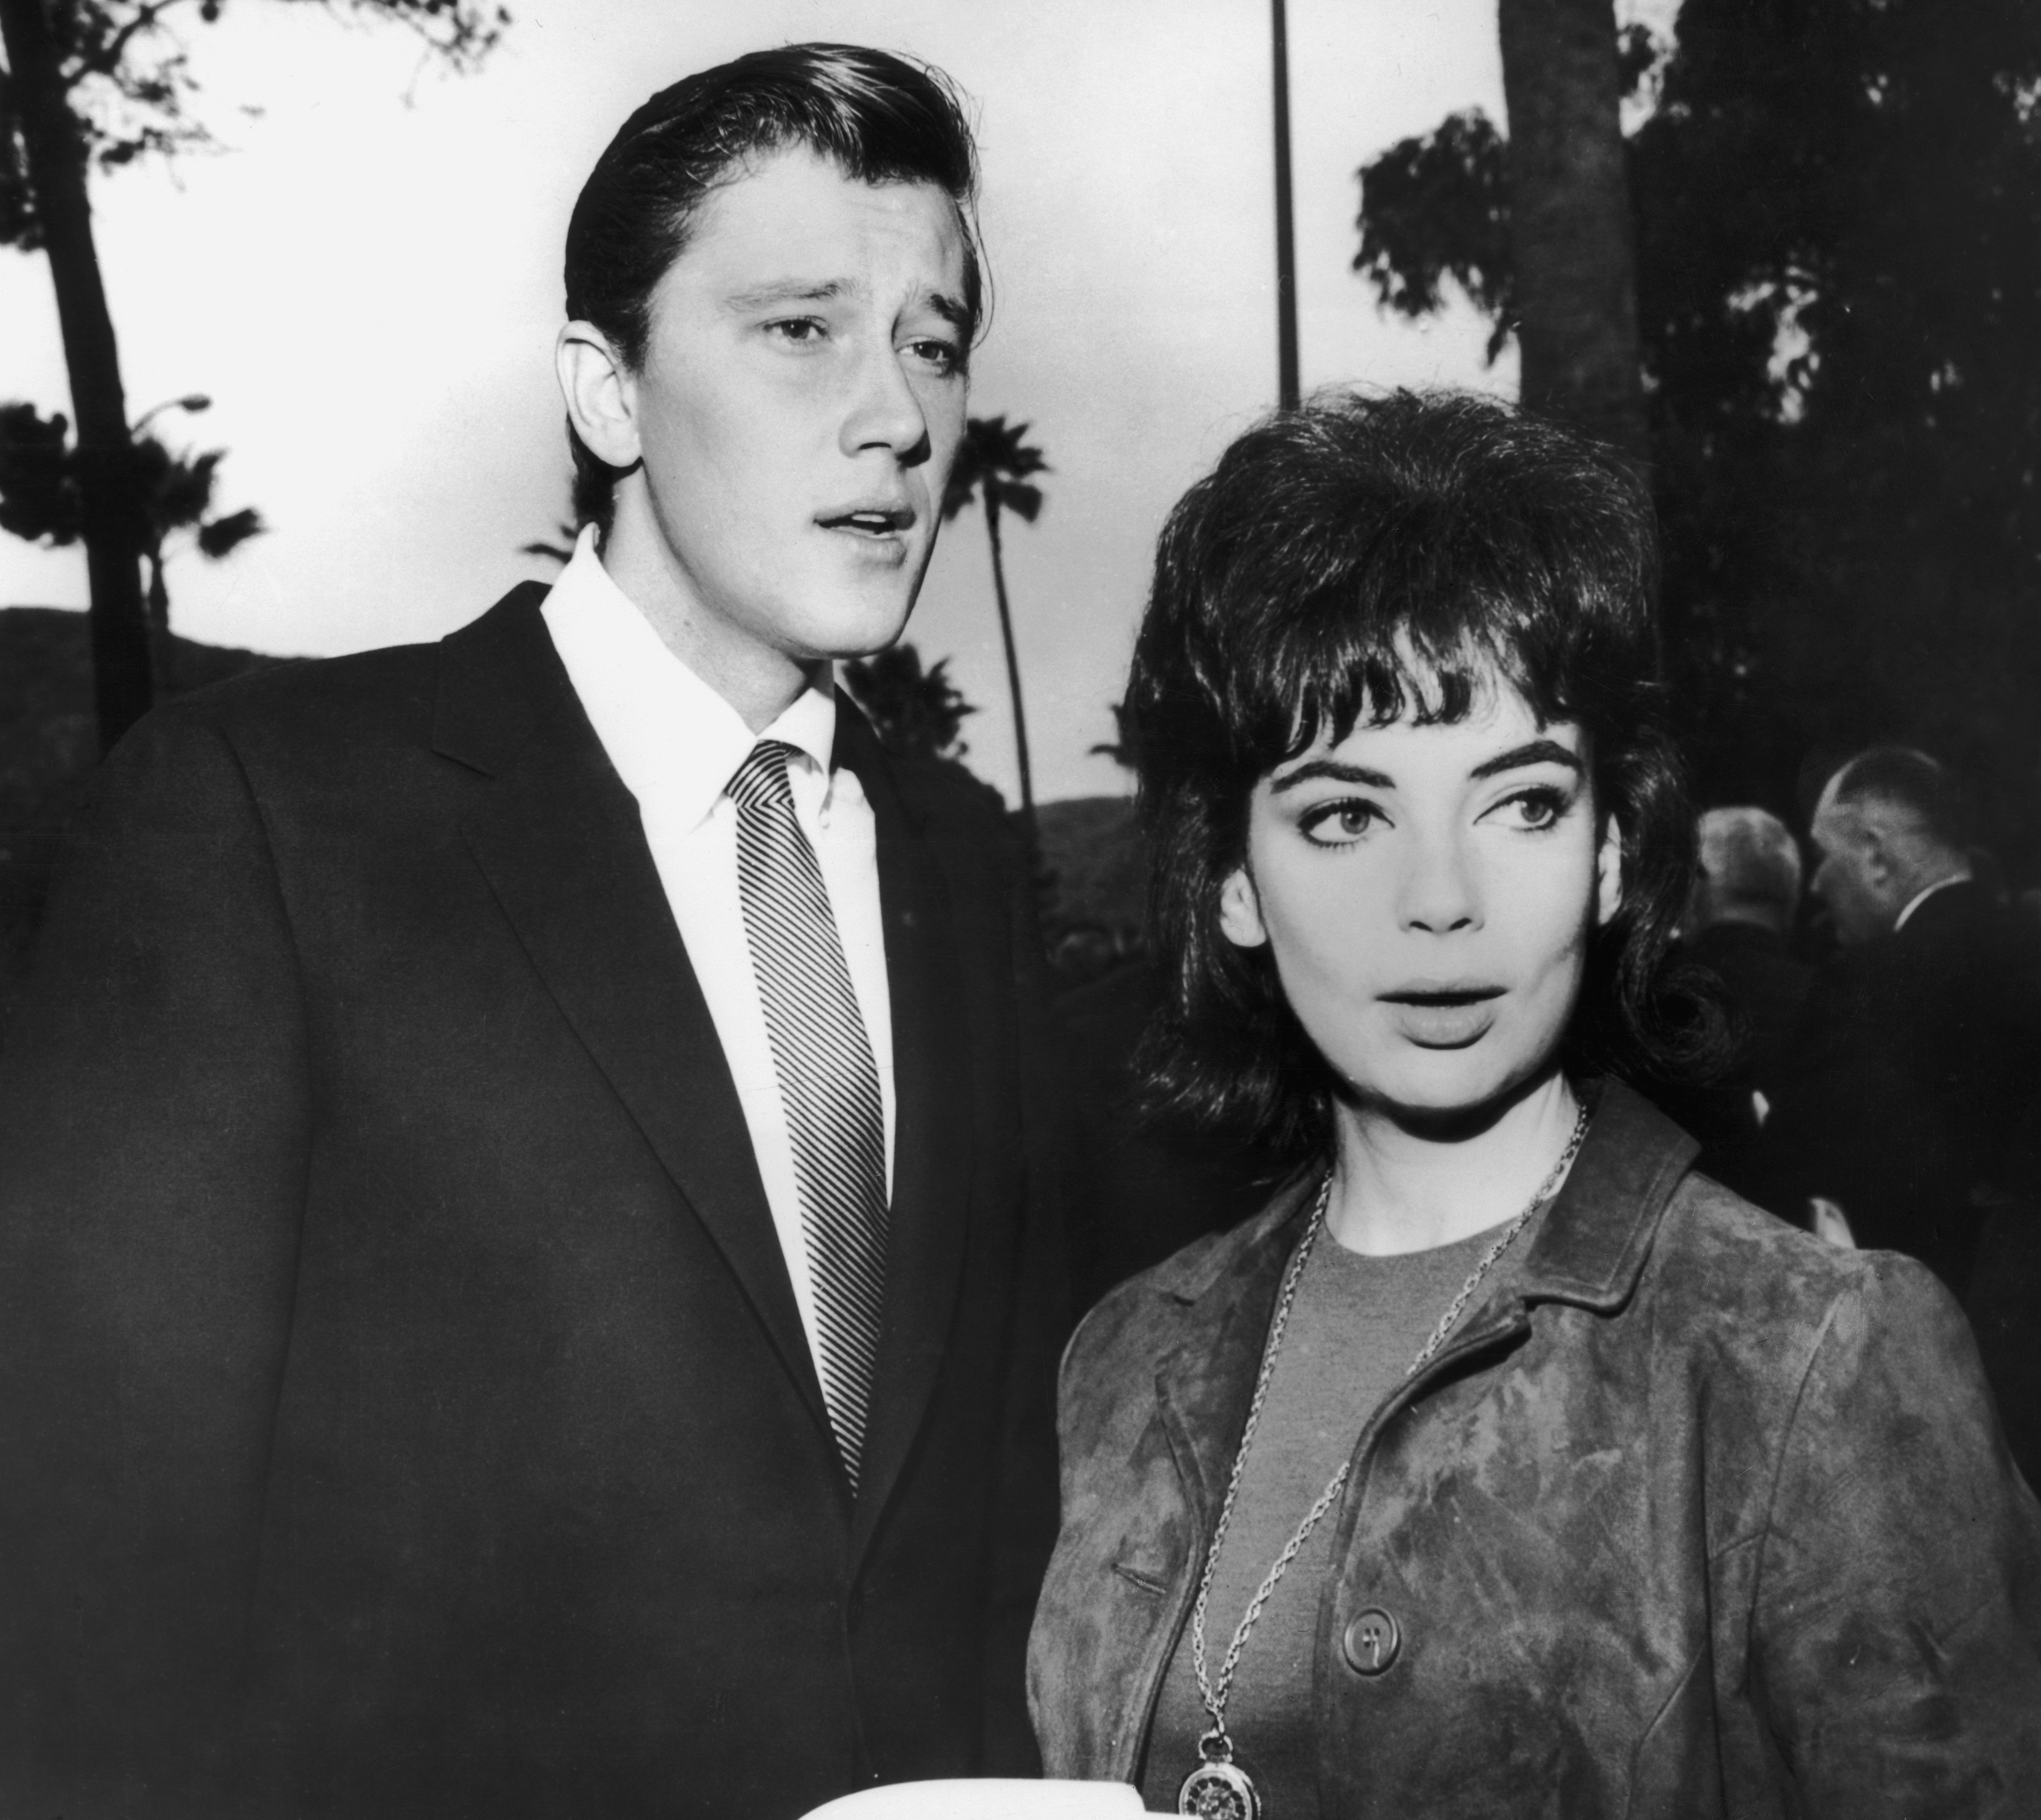 American actor Andrew Prine with girlfriend, actress Karyn 'Cookie' Kupcinet (1941 - 1963), circa 1962 | Source: Getty Images